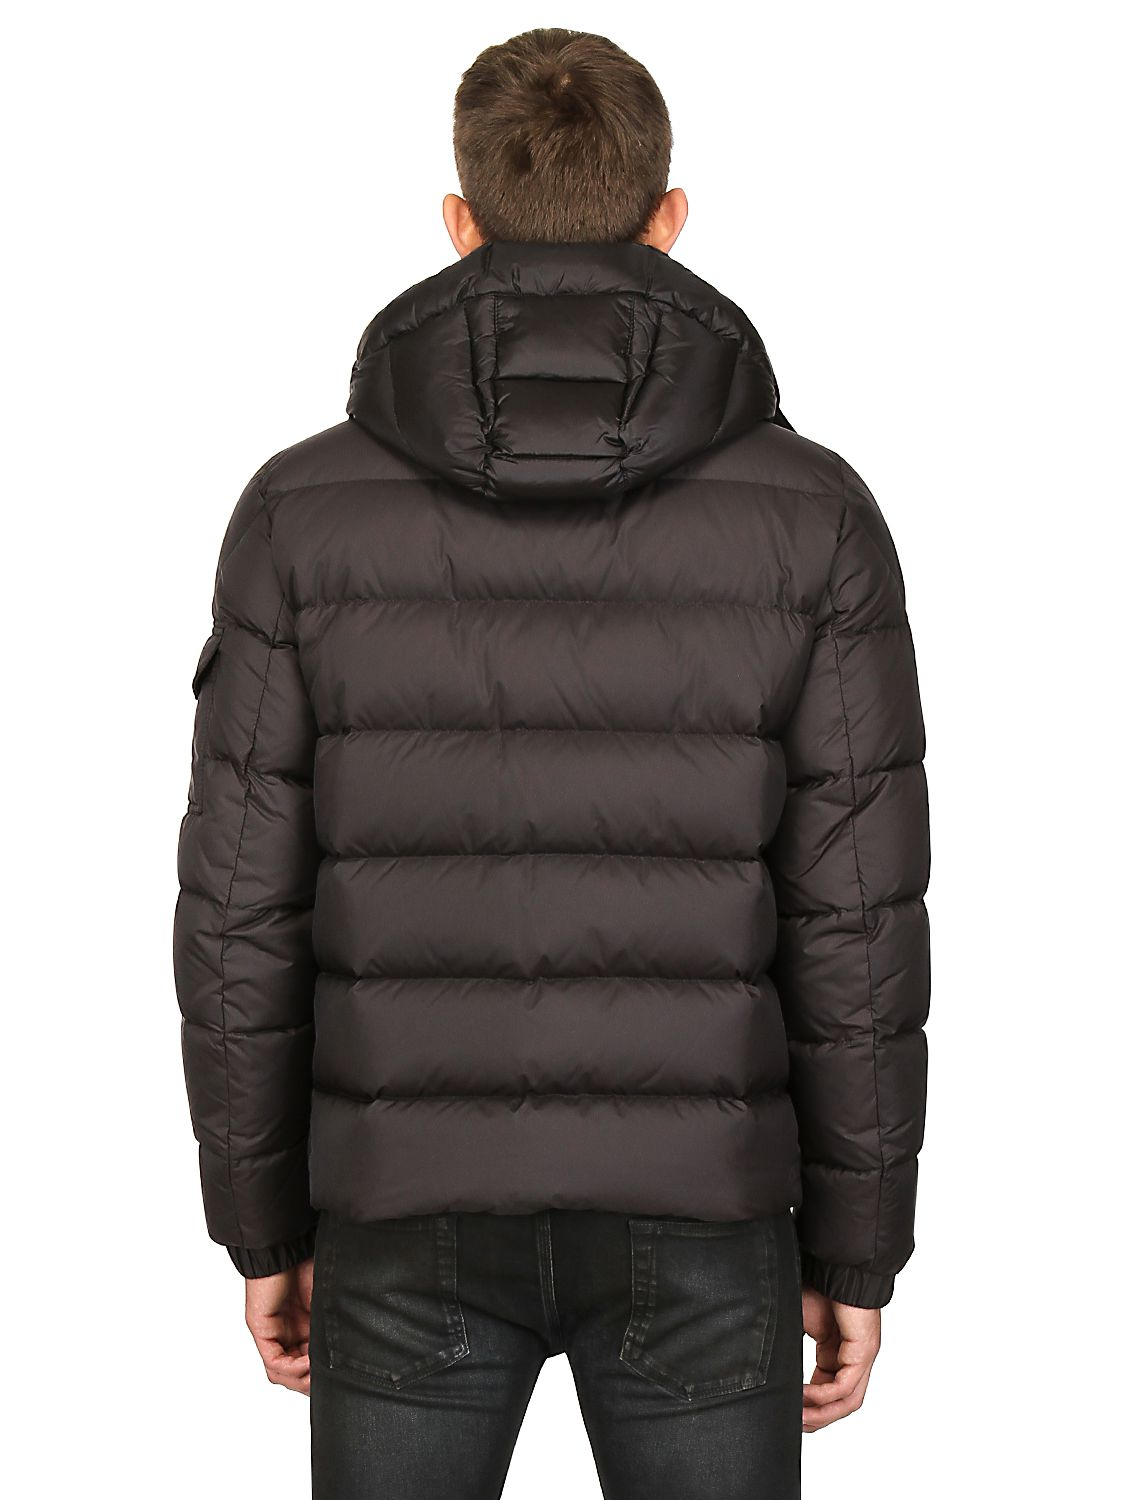 Moncler Hymalay Micro Lux Down Jacket in Brown for Men - Lyst